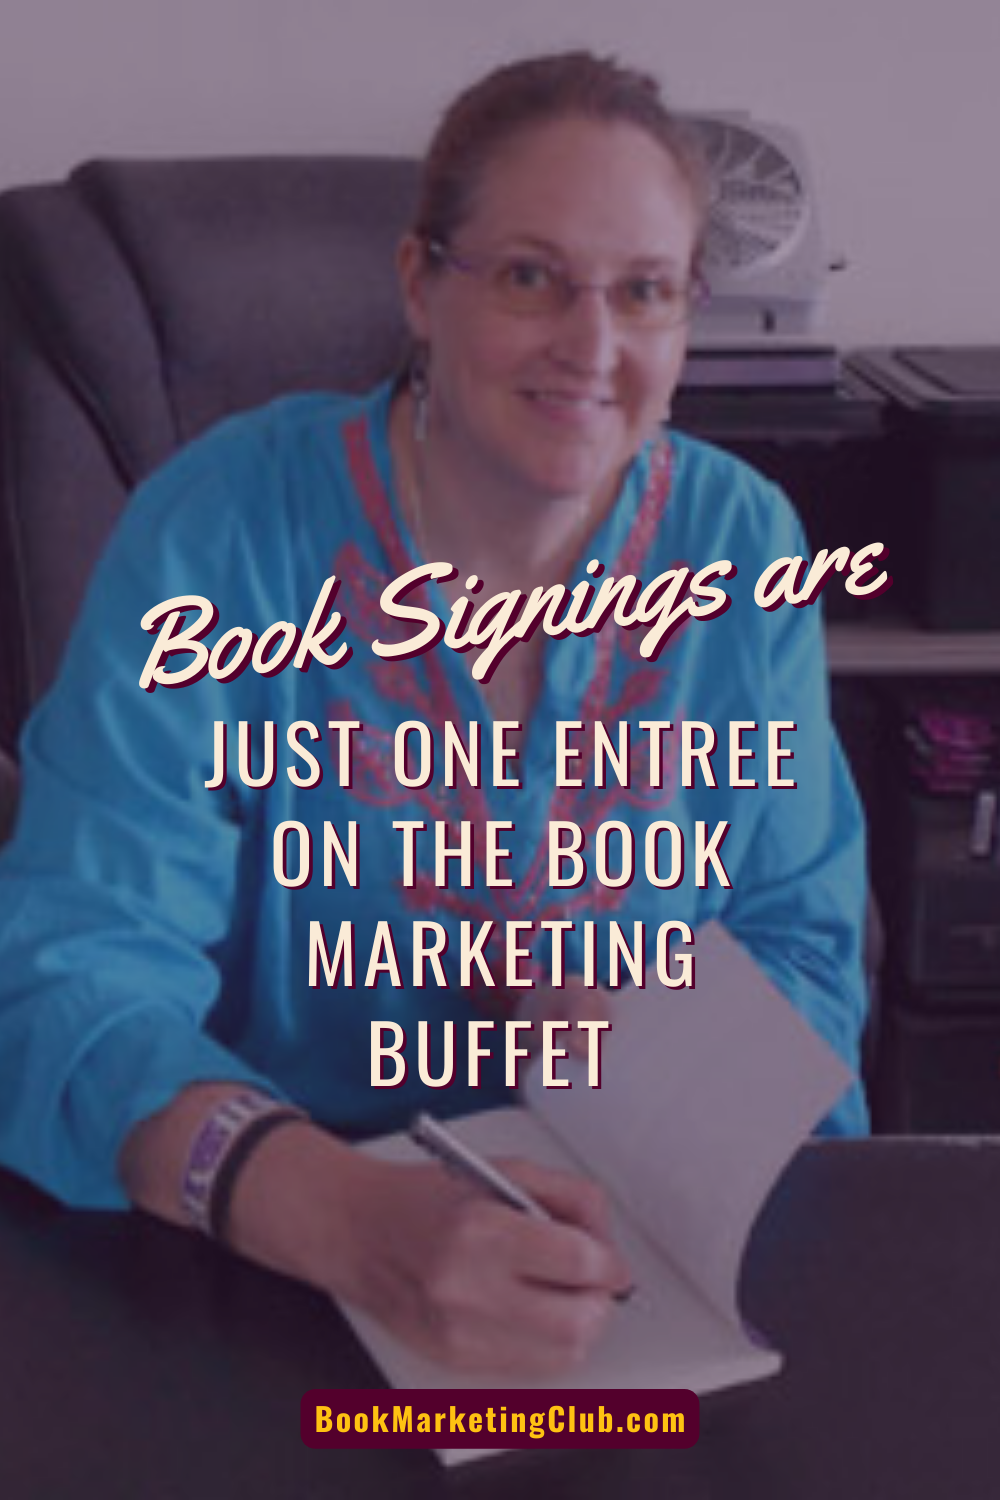 Book Signings are just one entree on the Book Marketing buffet